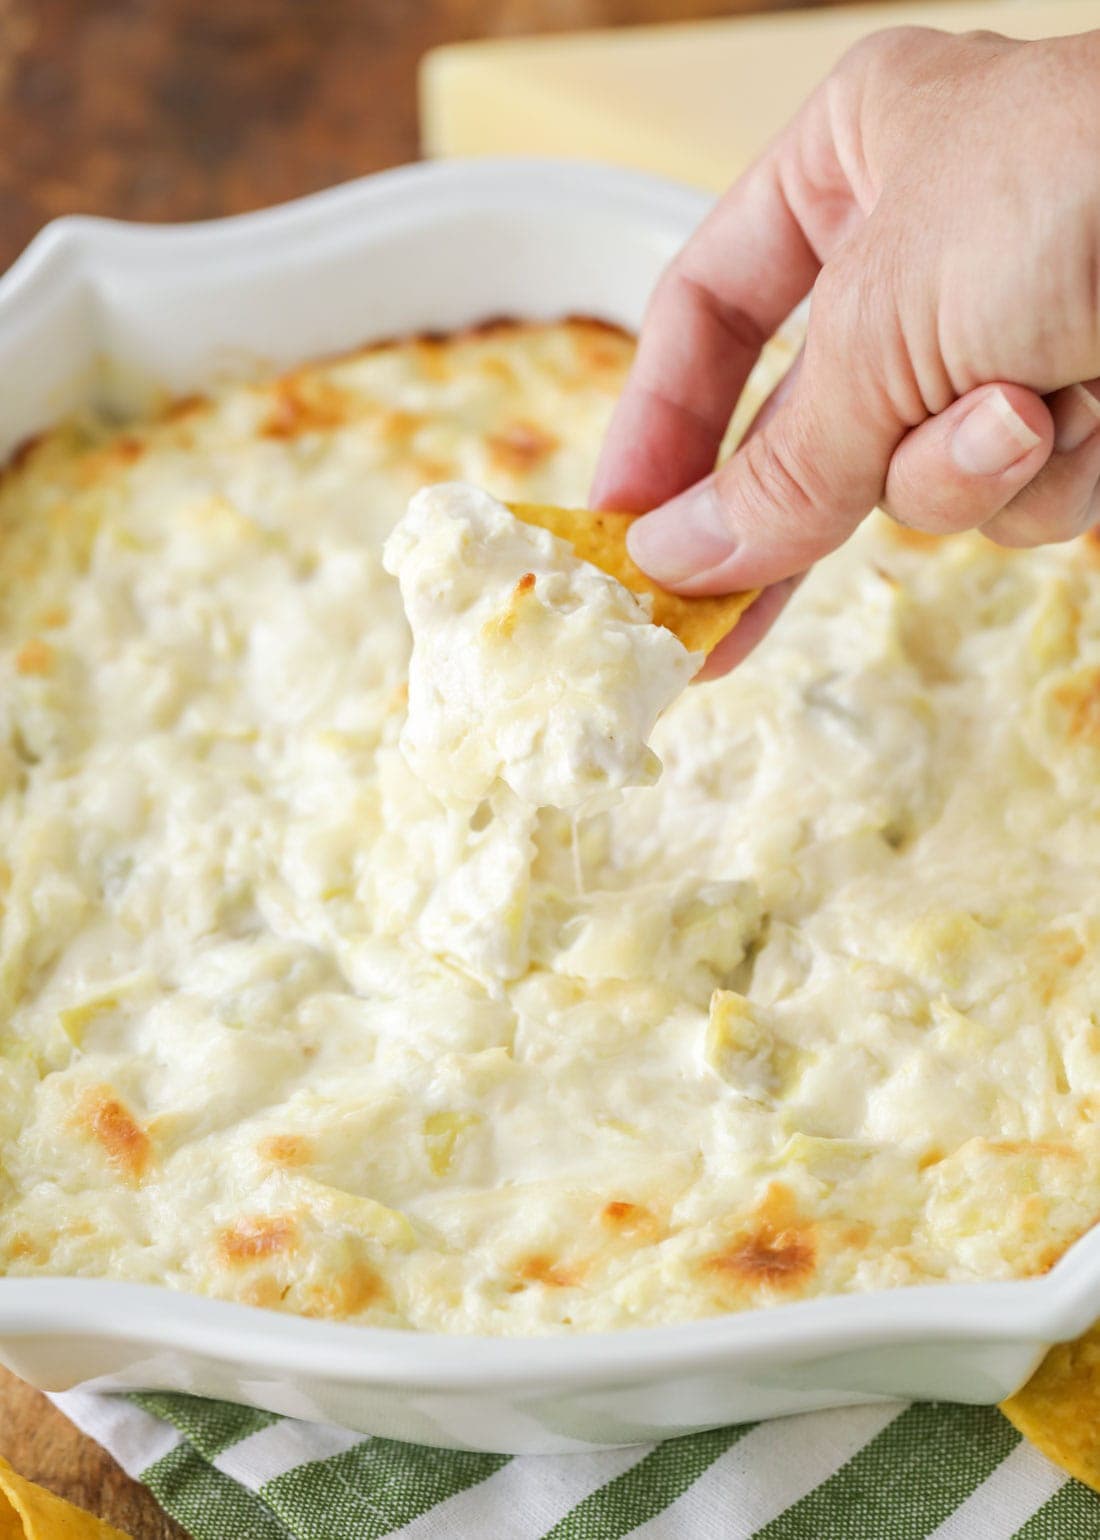 A hand dipping a chip into hot artichoke dip.